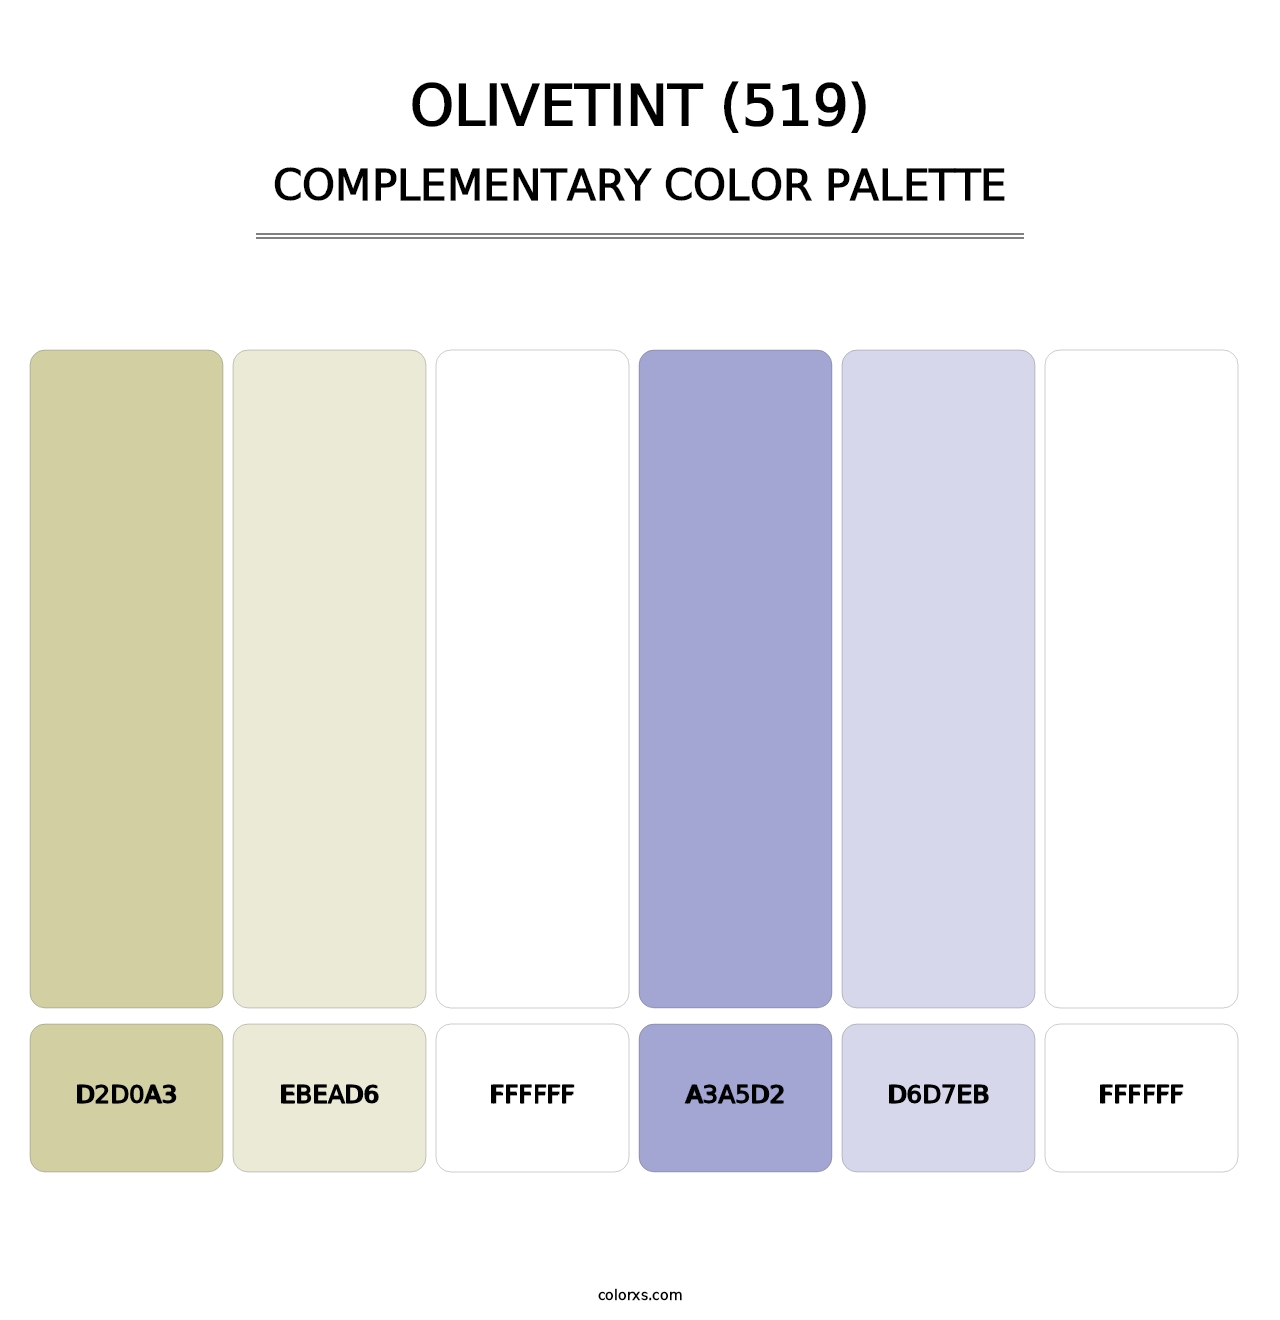 Olivetint (519) - Complementary Color Palette